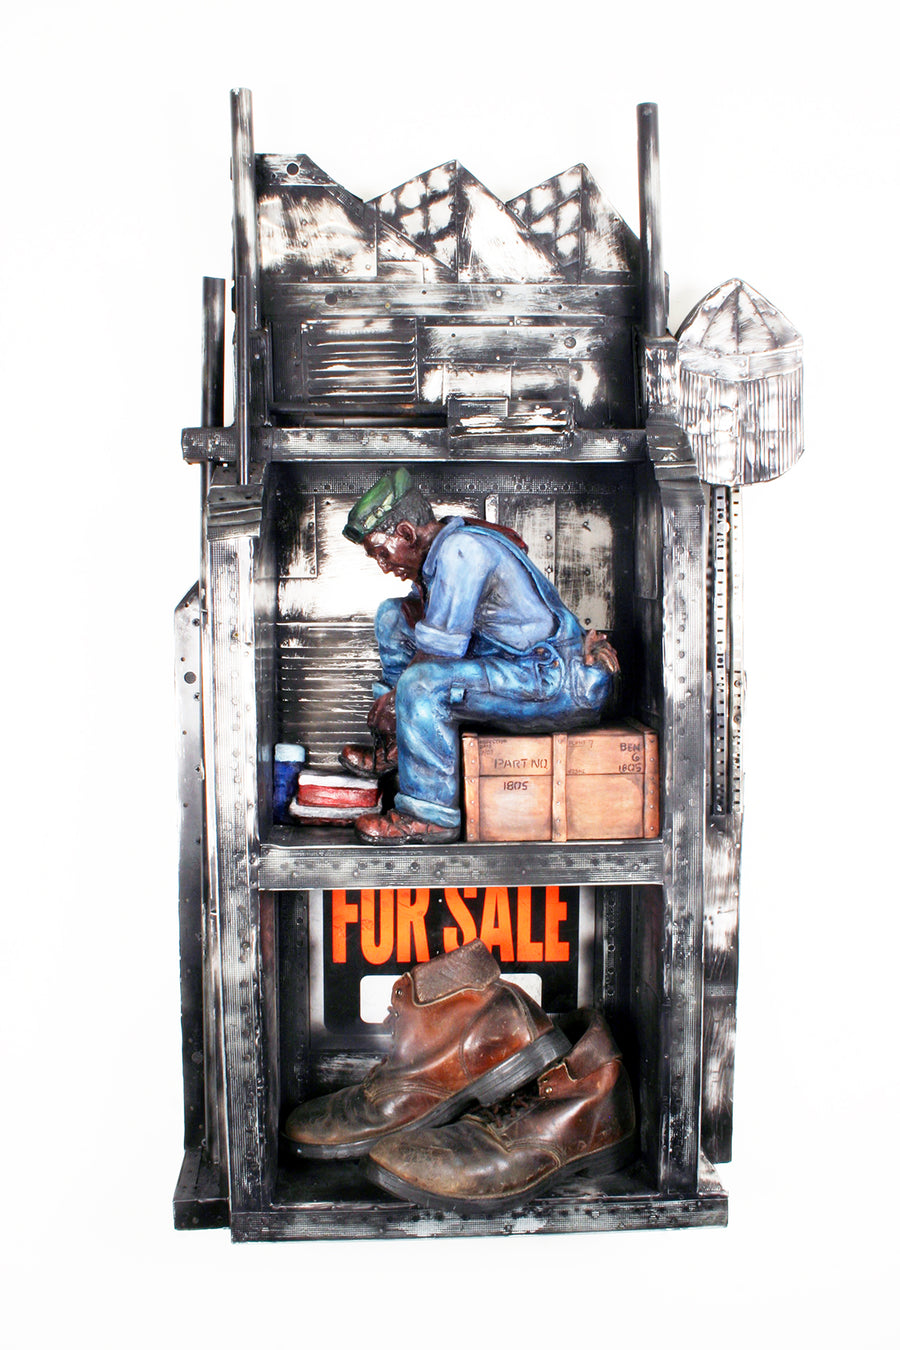 The top shelf is empty with harshly shaped metal that gives the impression of mountains at its top. The middle shelf holds a ceramic figure of a black man in denim work overalls and a green hat sitting on a wooden box as he ties his work boots. His shoe is resting on his lunch cooler that sits next to a thermos. The bottom shelf features a For Sale sign erected behind a pair of worn leather work boots.